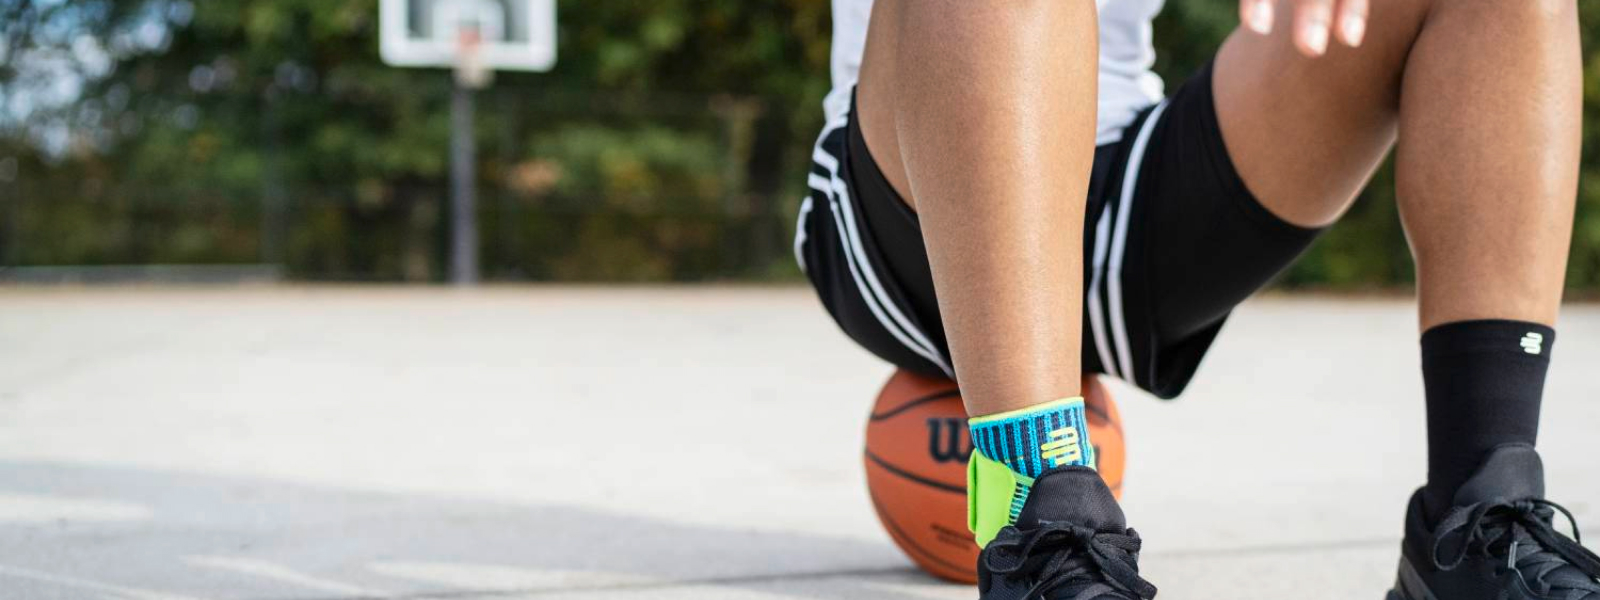 Streetball player with foot bandage sits on a basketball on a street court field